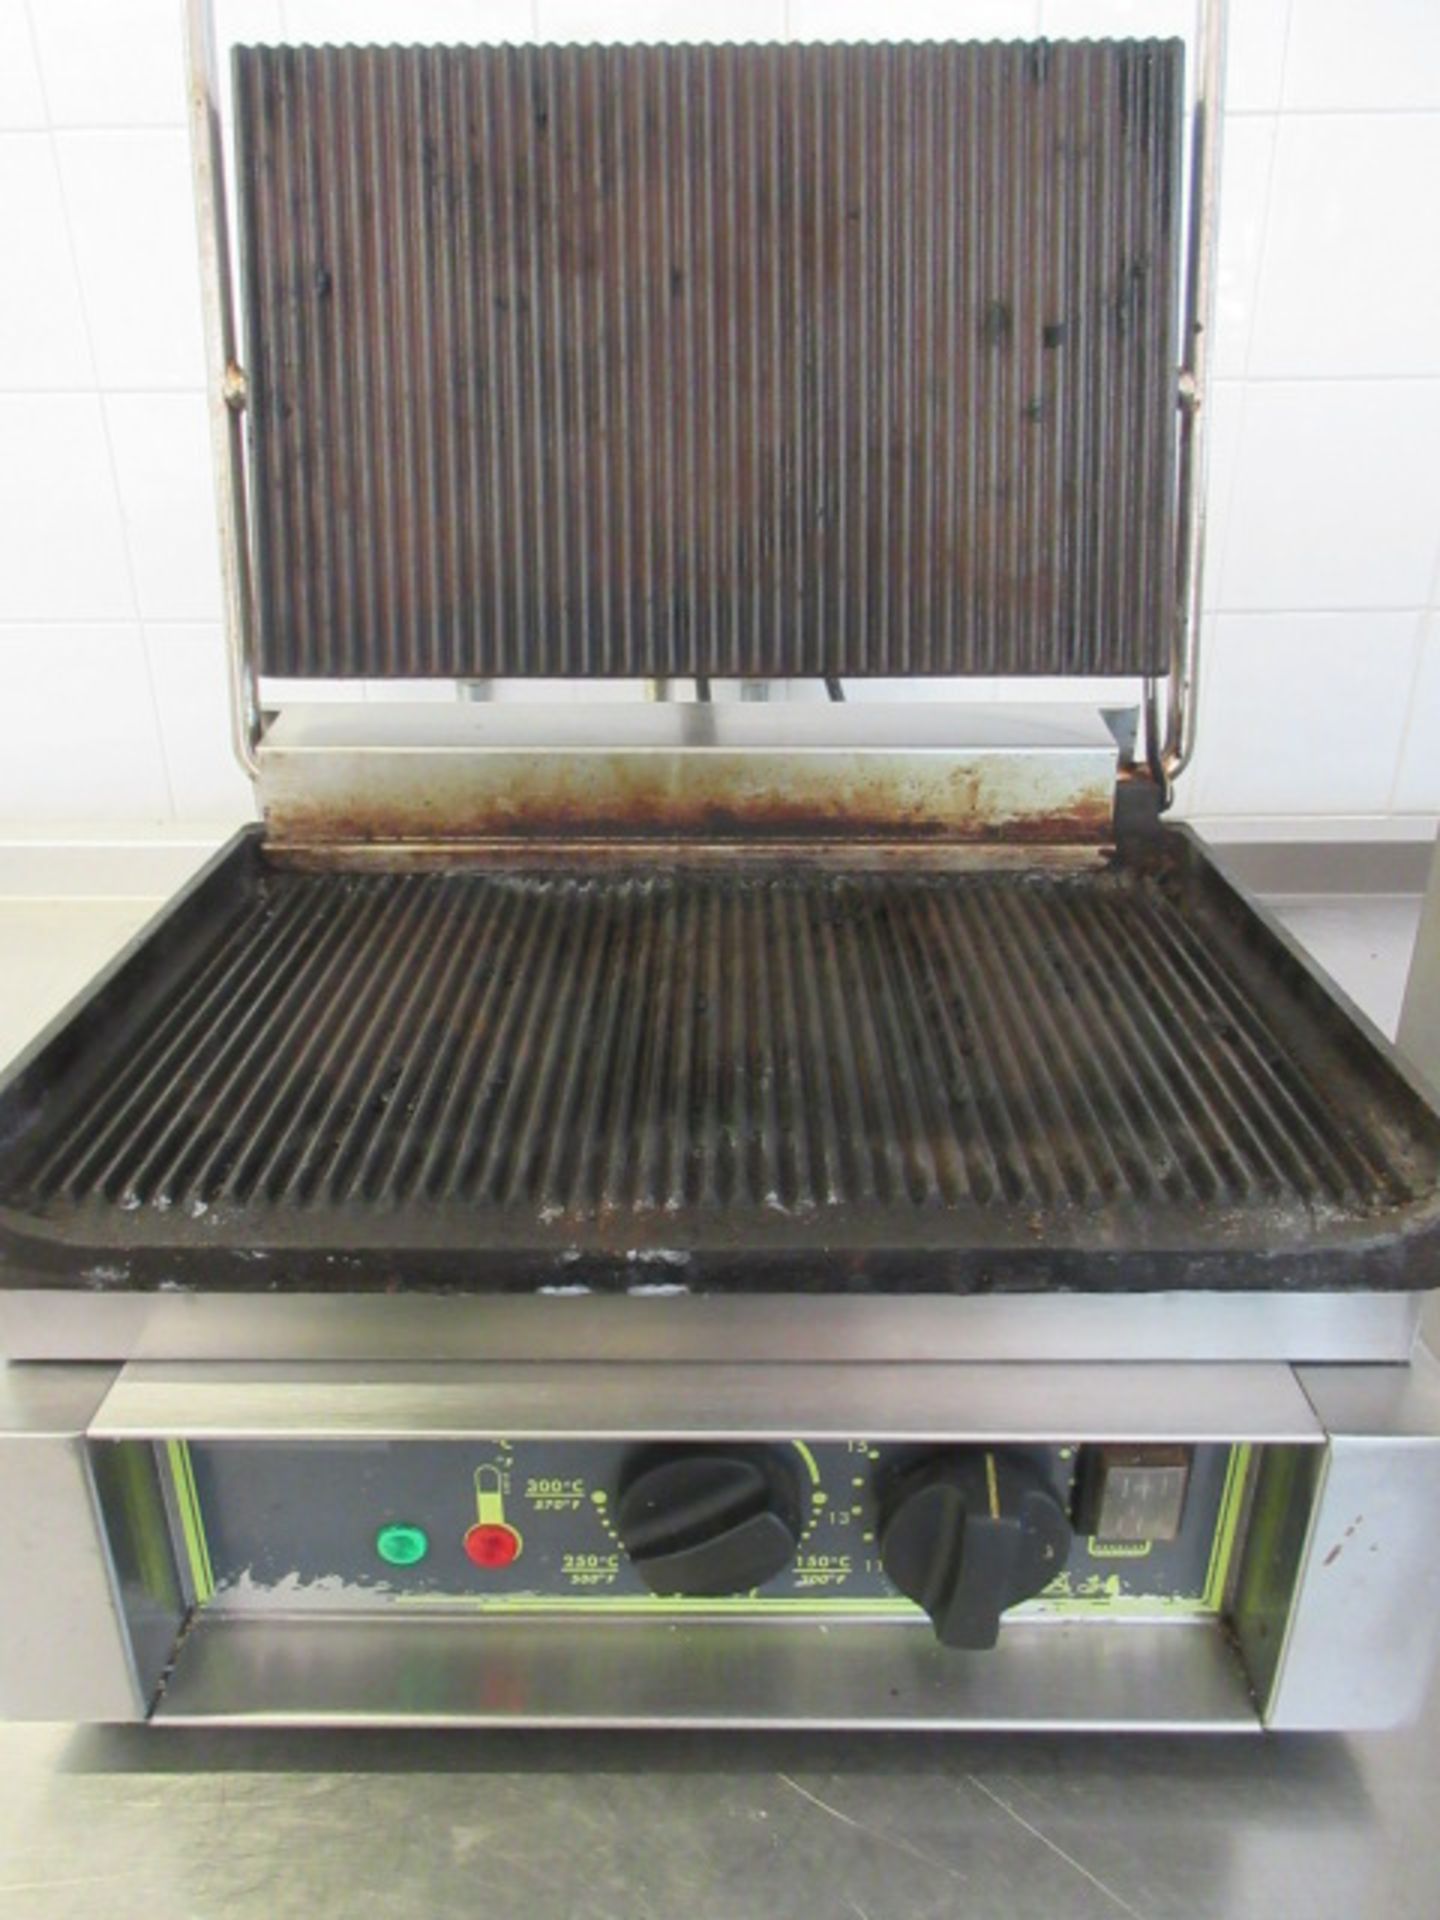 ROLLER GRILL PANINI HOT PLATE - Image 2 of 3